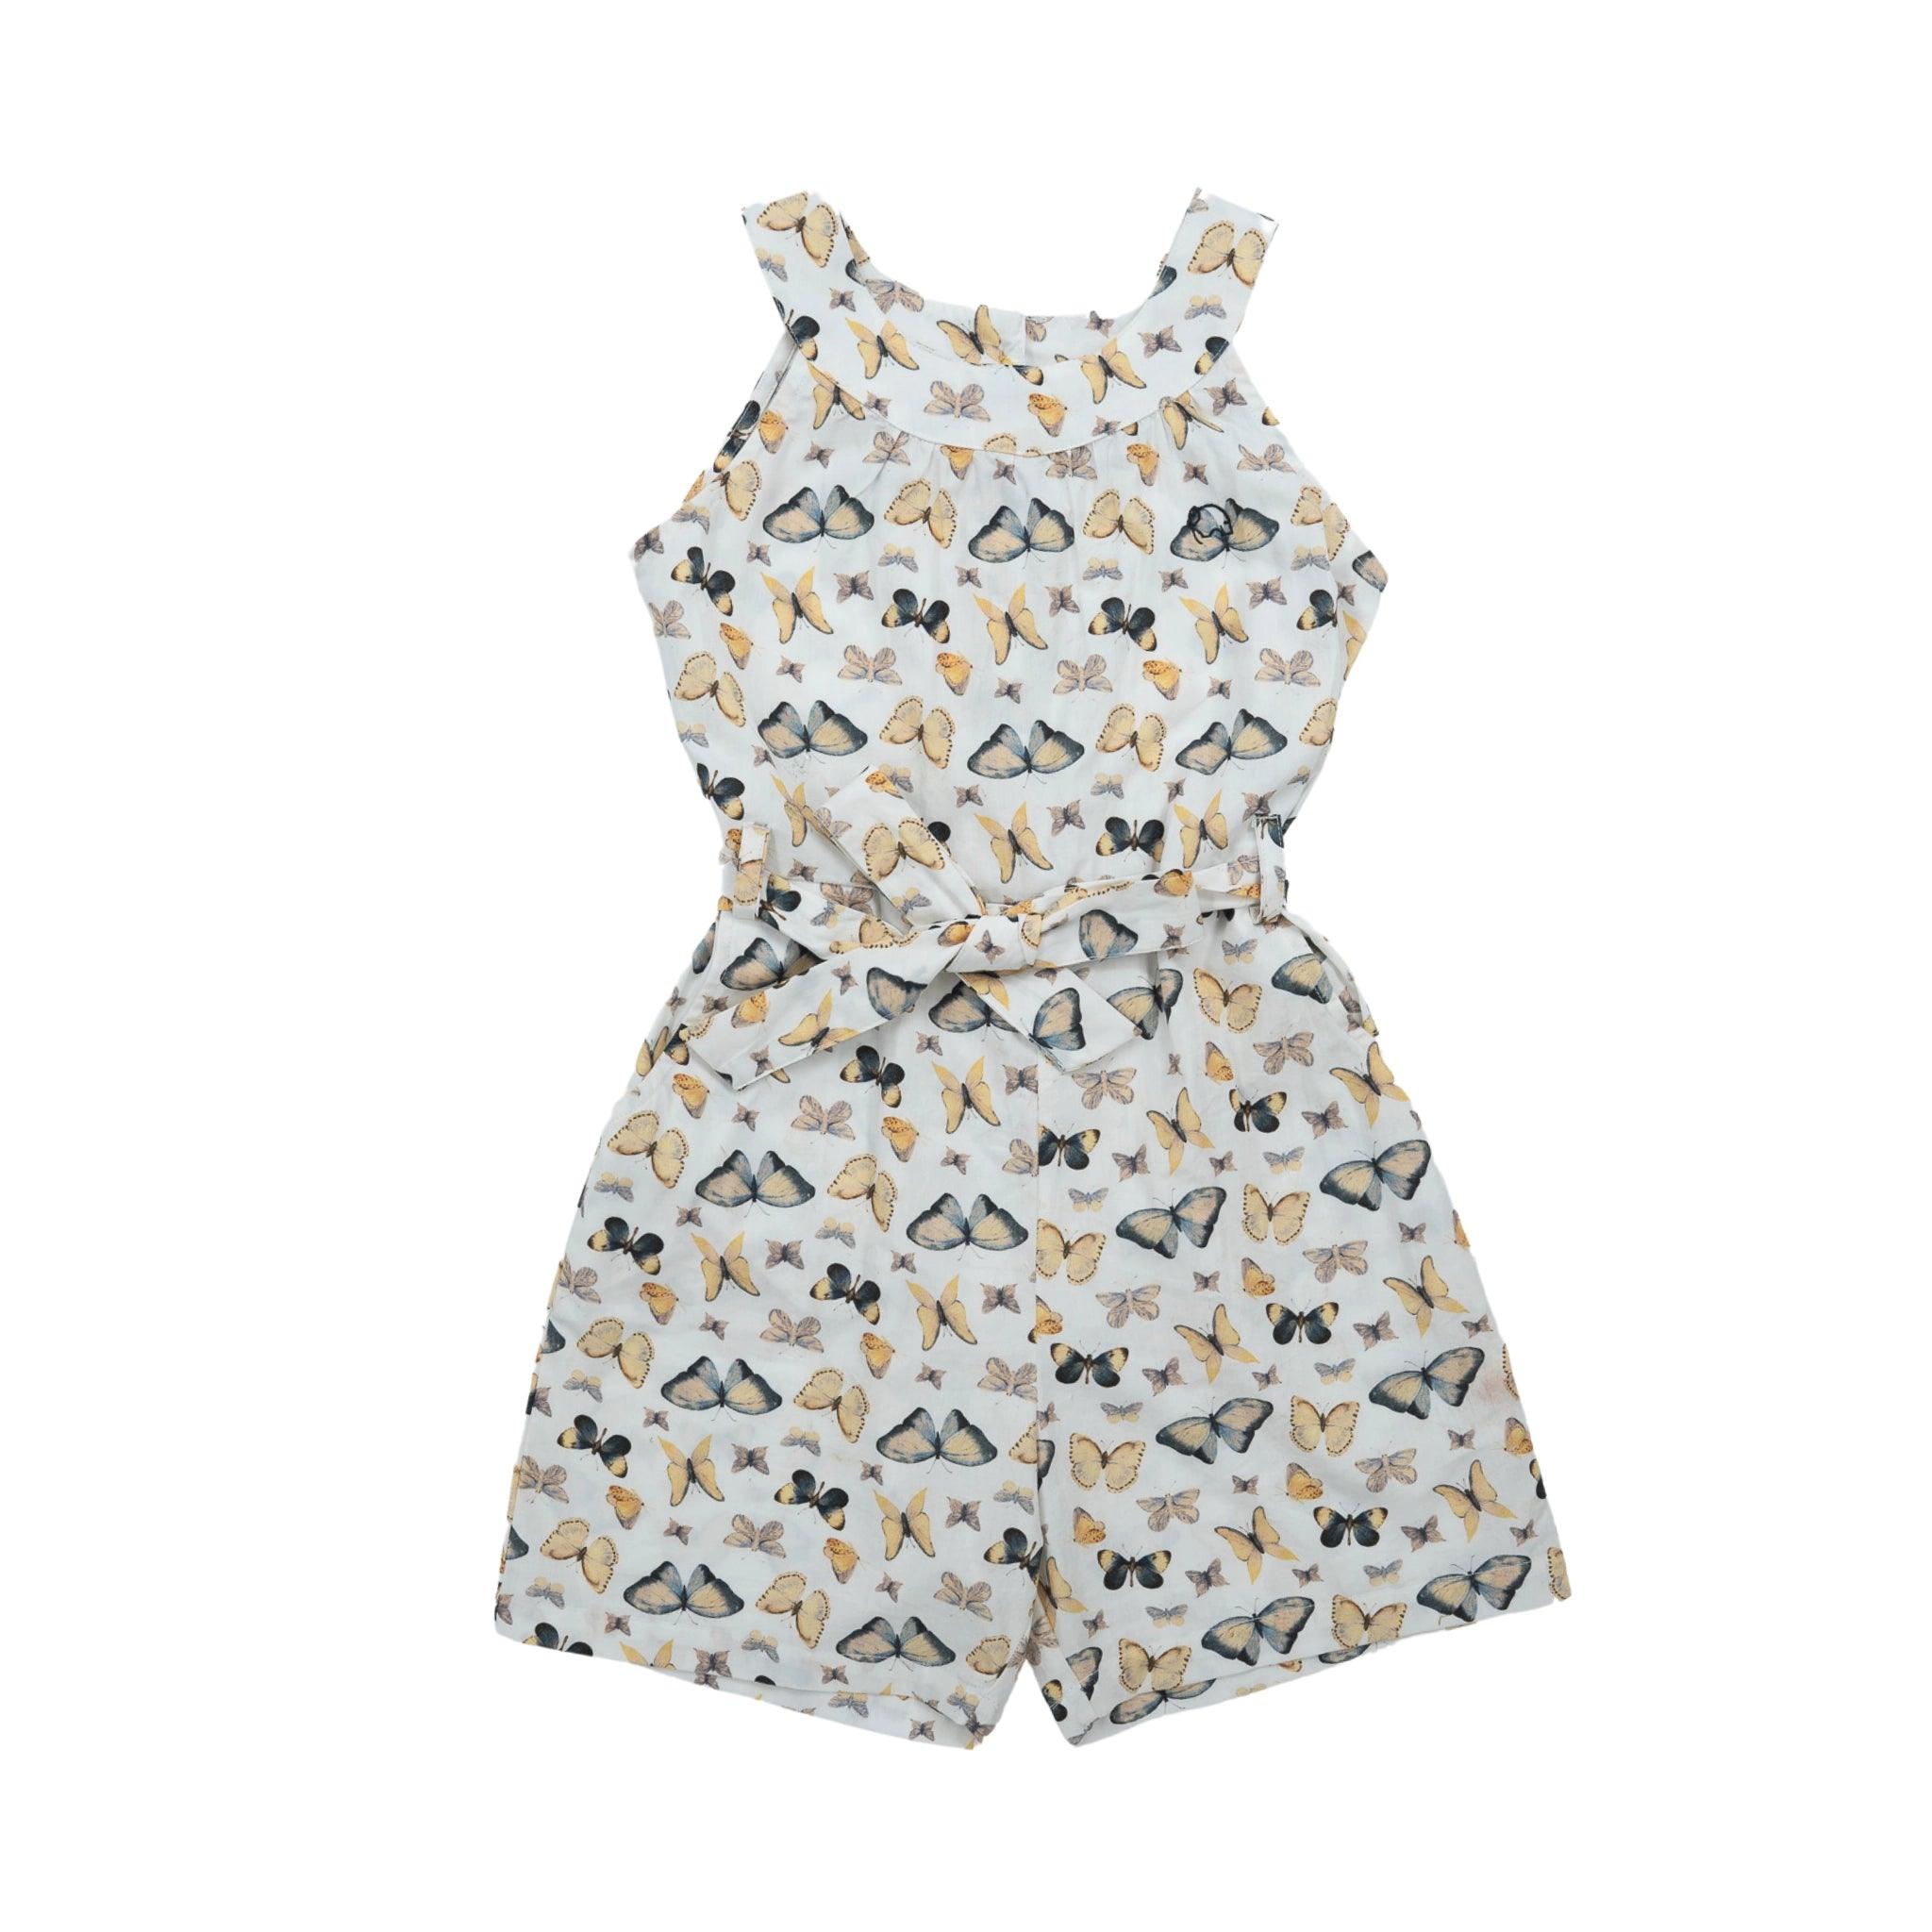 A girls' White Adventure-Ready Cotton Play Suit by Karee featuring birds for a playful adventure.